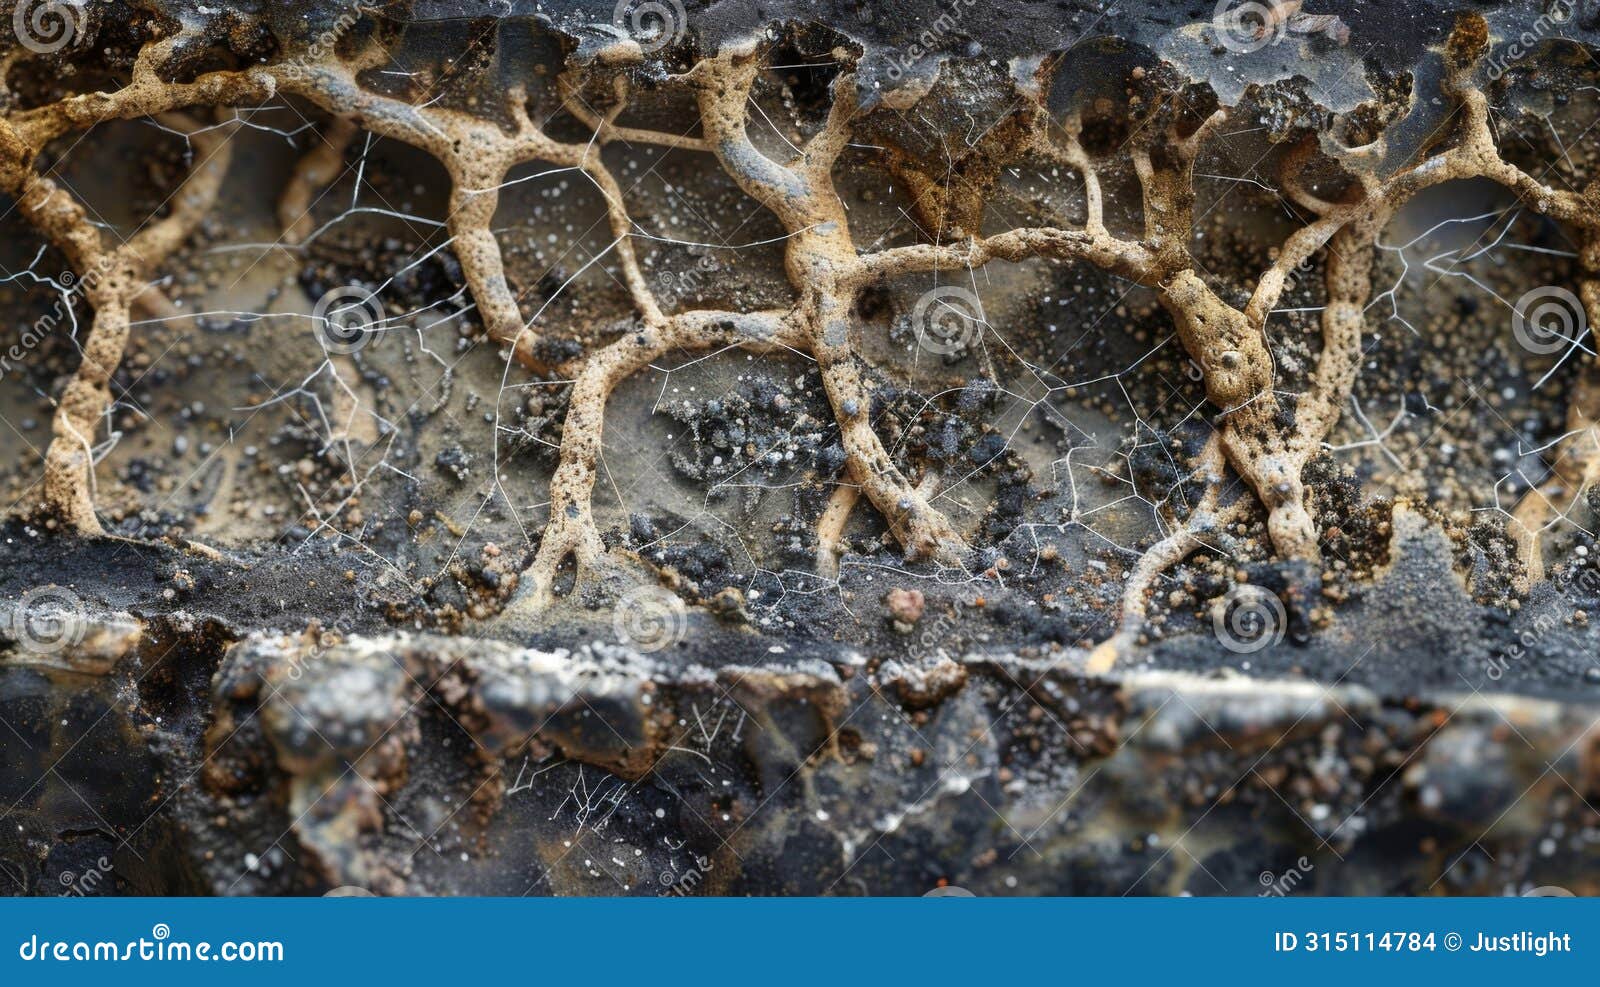 a crosssection view of the soil revealing the intricate web of mycelium connecting plant roots and decomposing organic